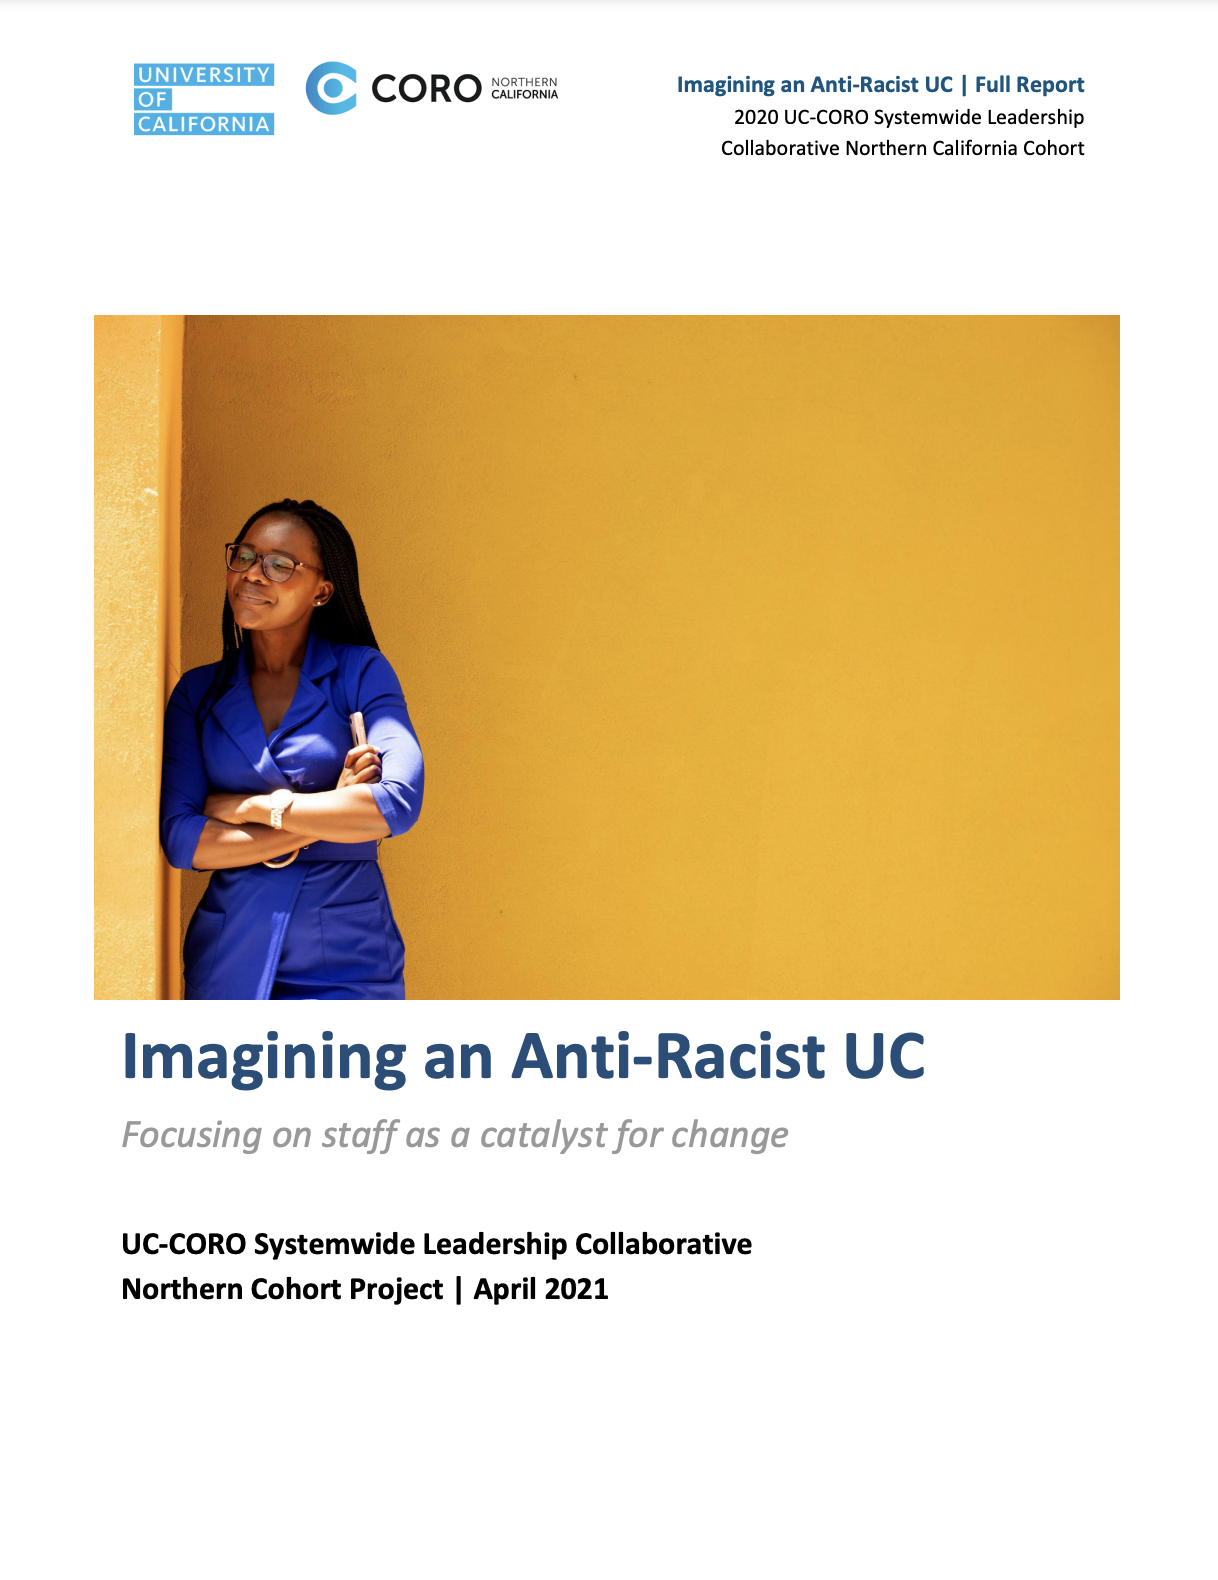 Cover of the 2020 CORO Report shows a woman of color standing against a yellow wall. "Imagining an Anti-Racist UC"